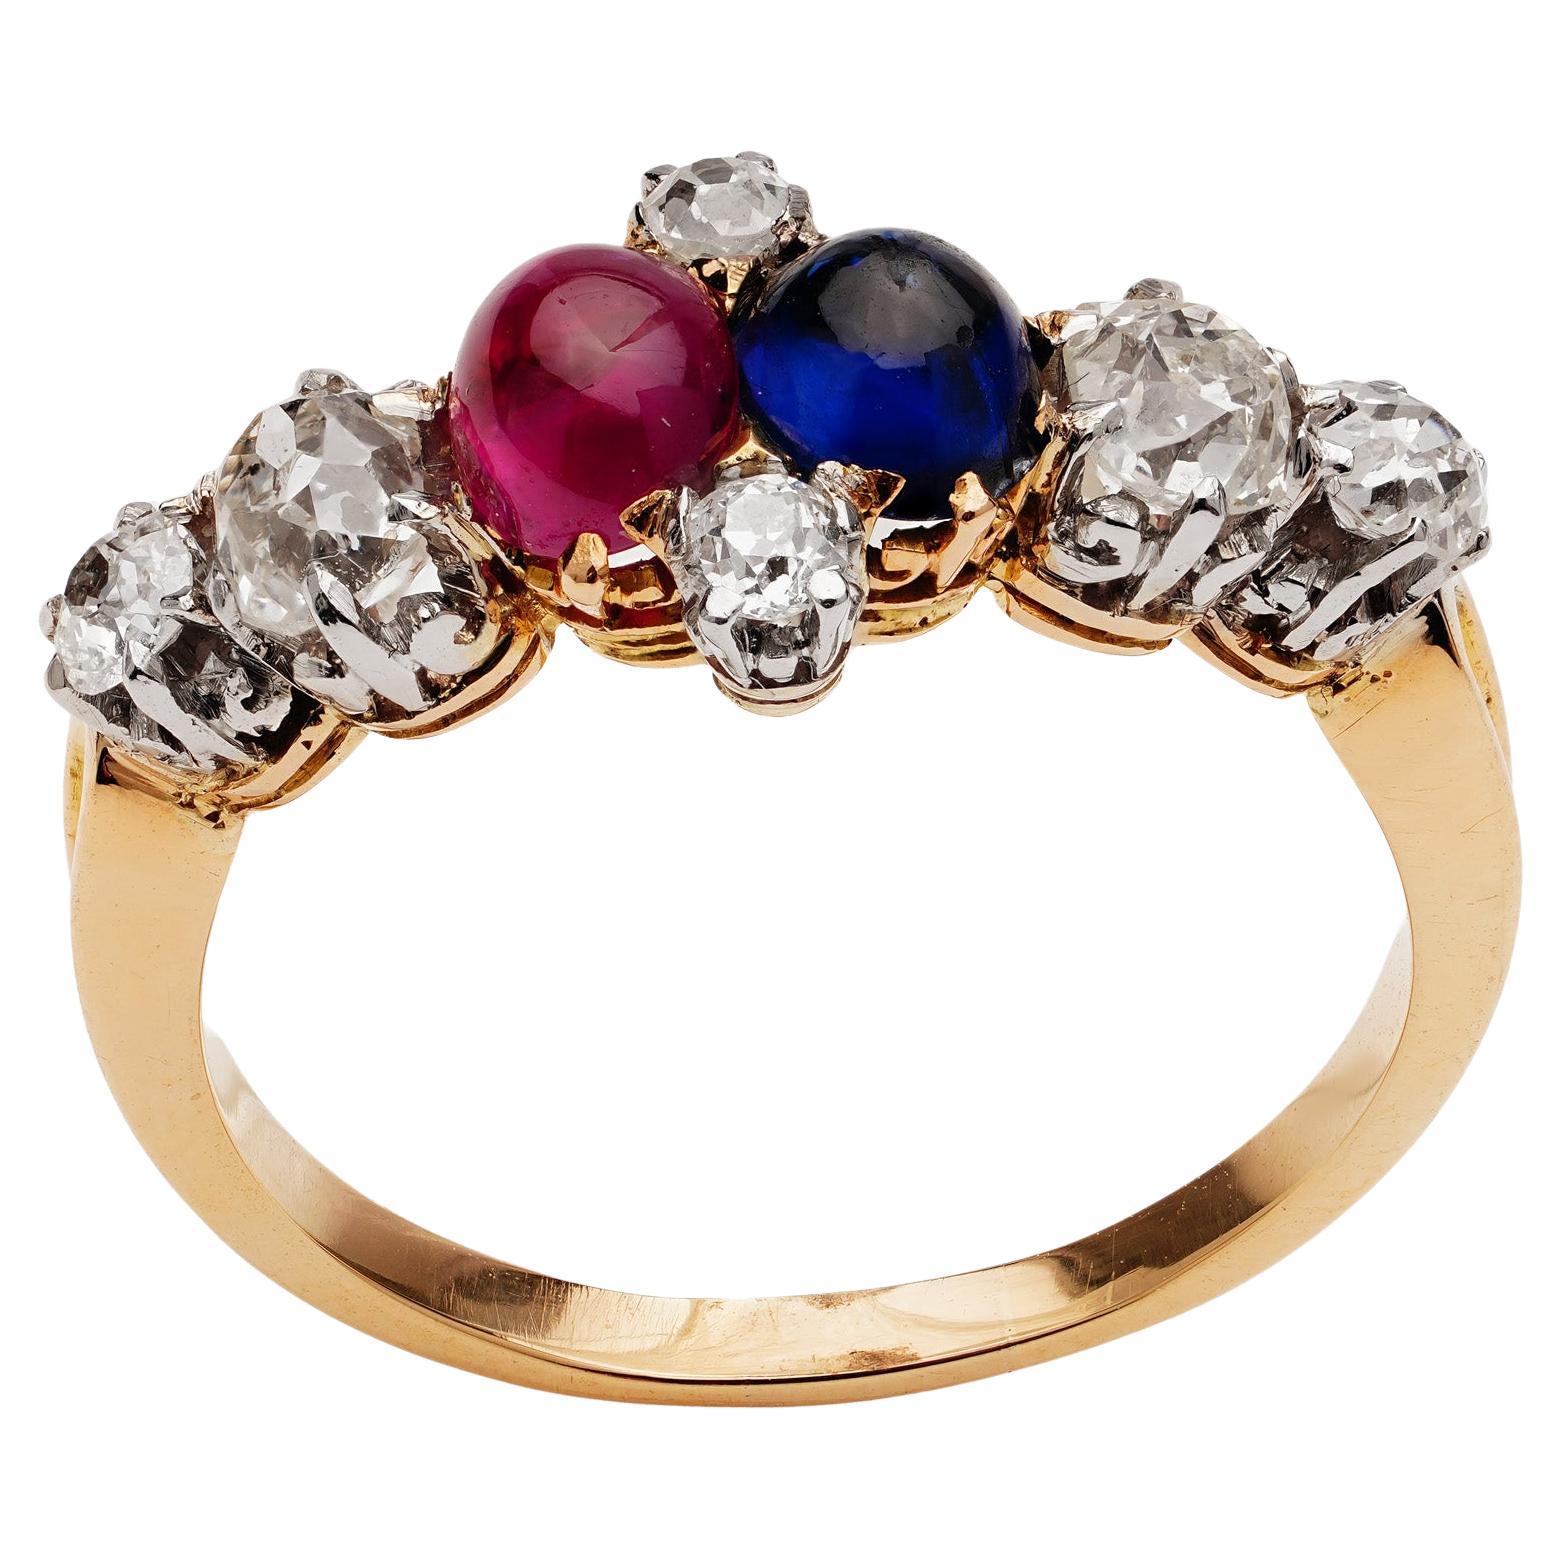 Antique Victorian 18kt. Yellow Gold Ring Set with a Cabochon Sapphire and Ruby